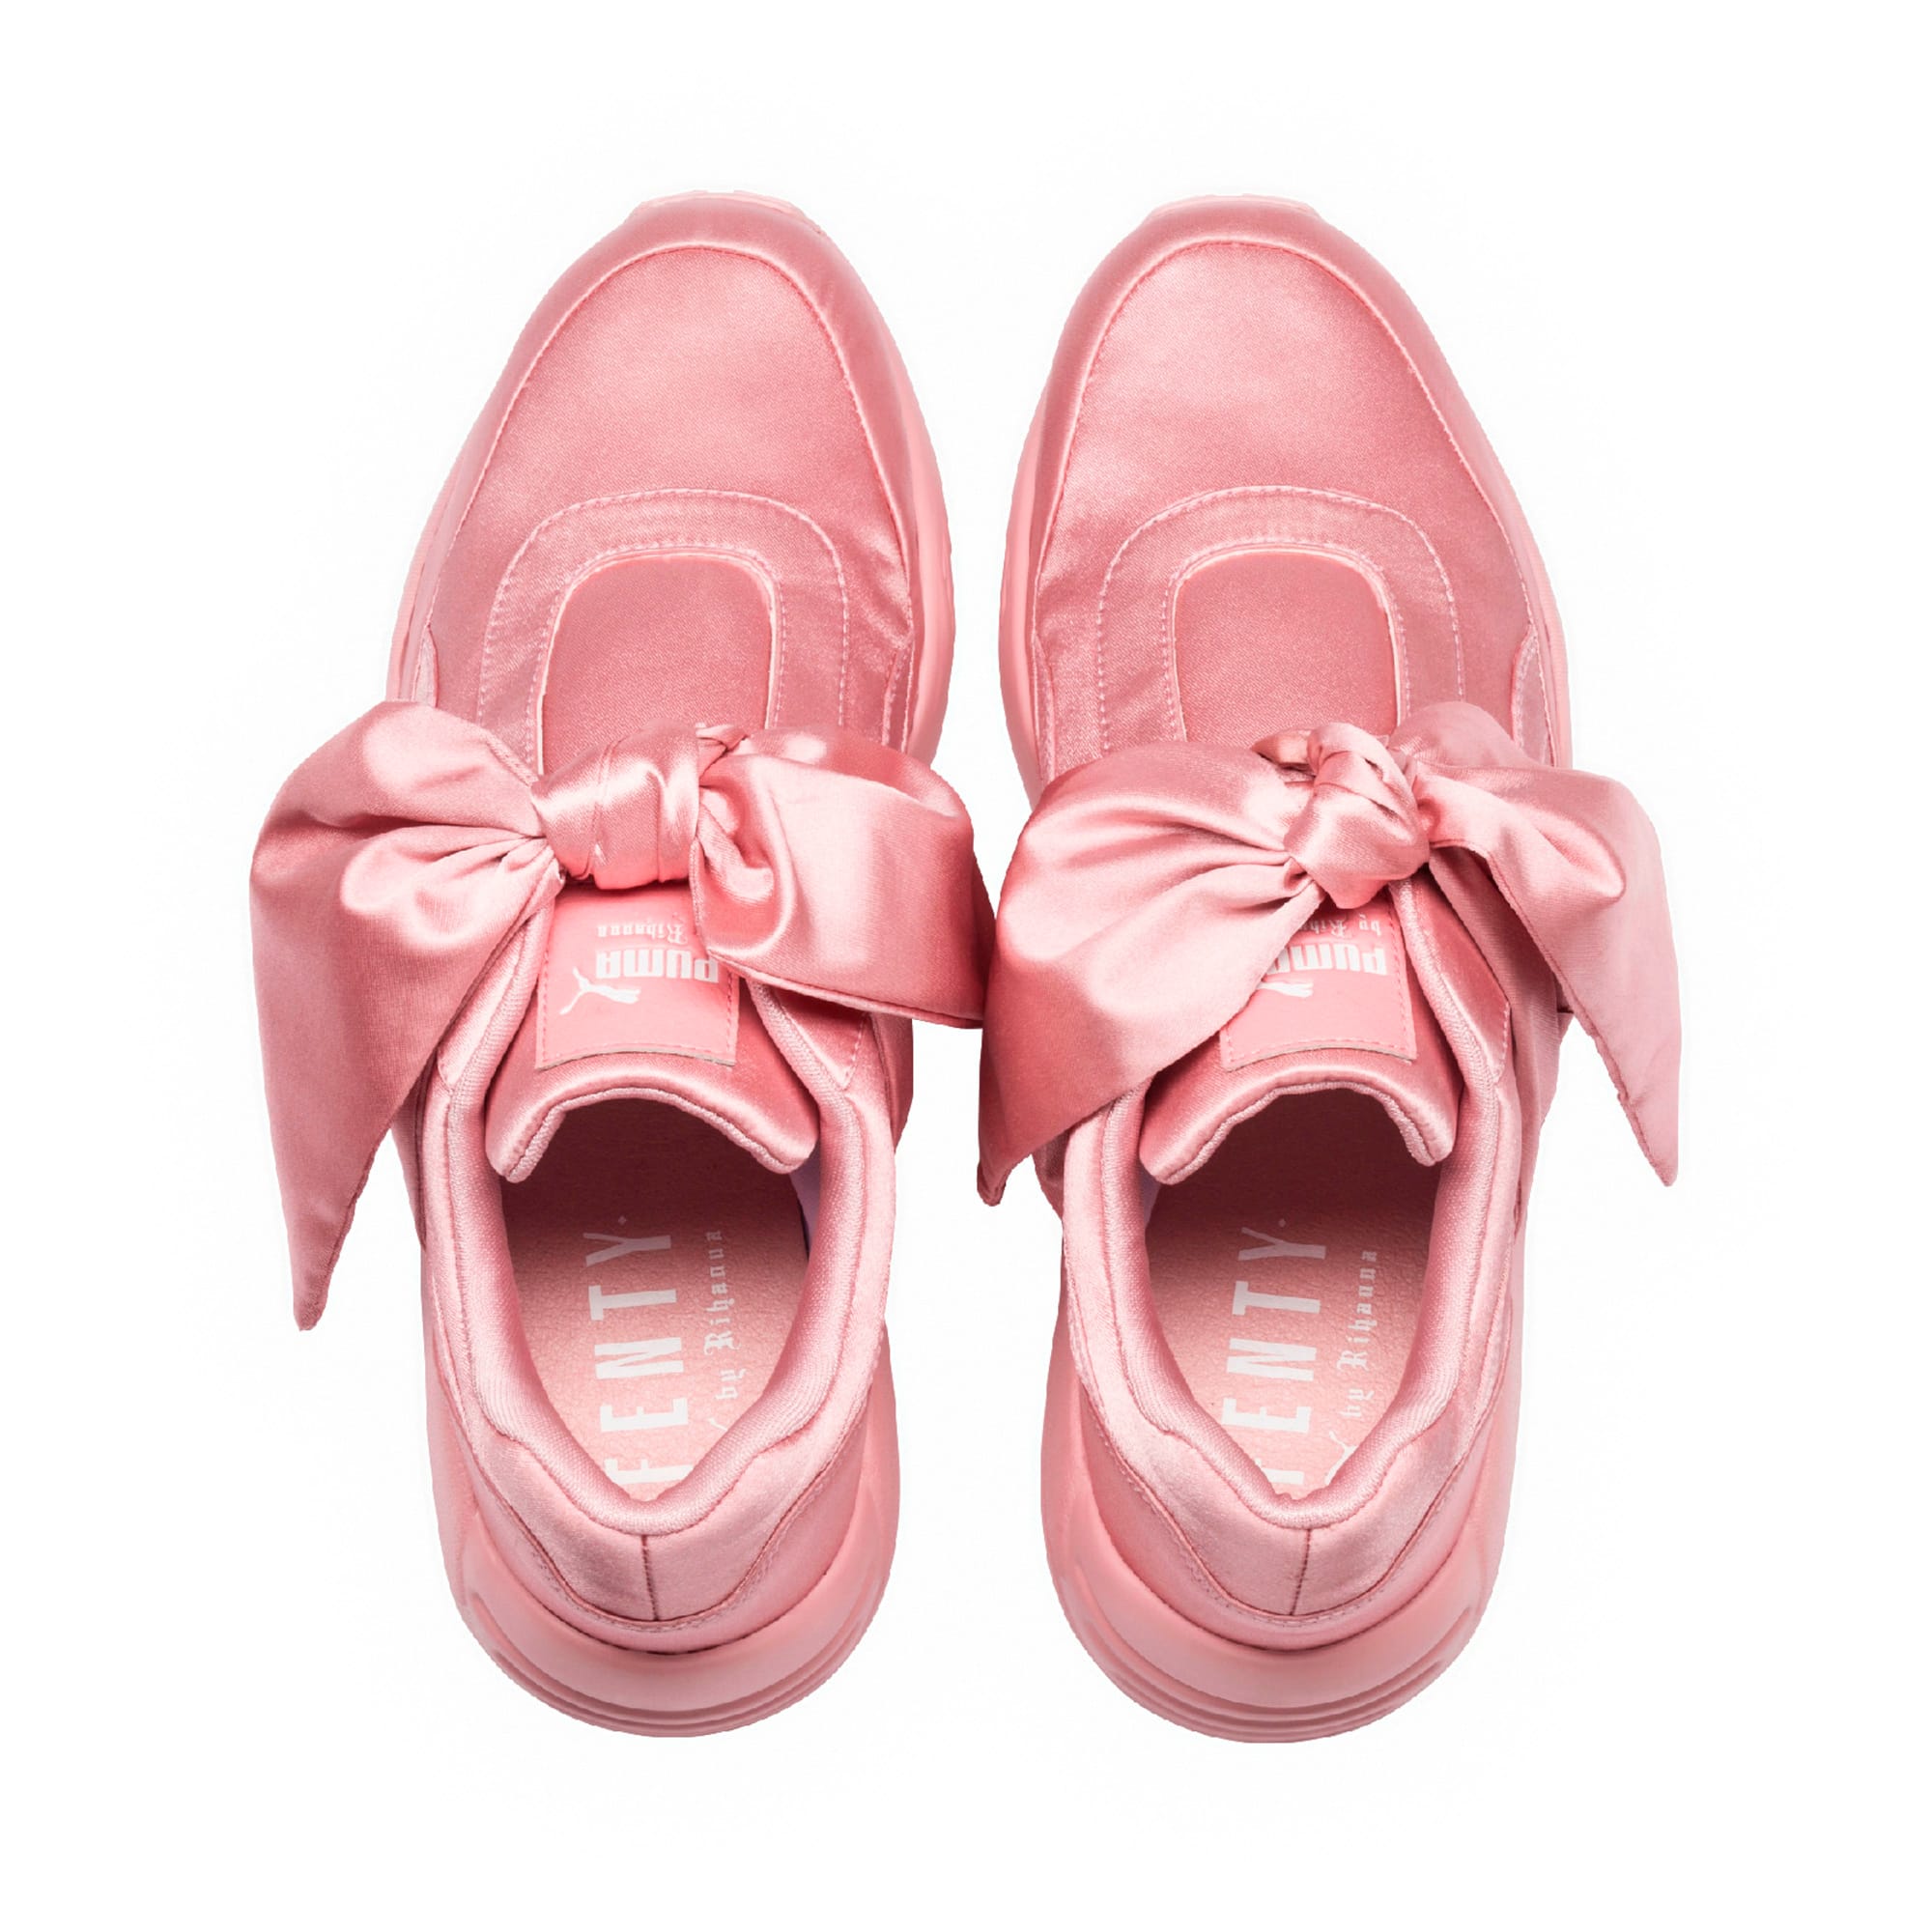 puma pink shoes with bow